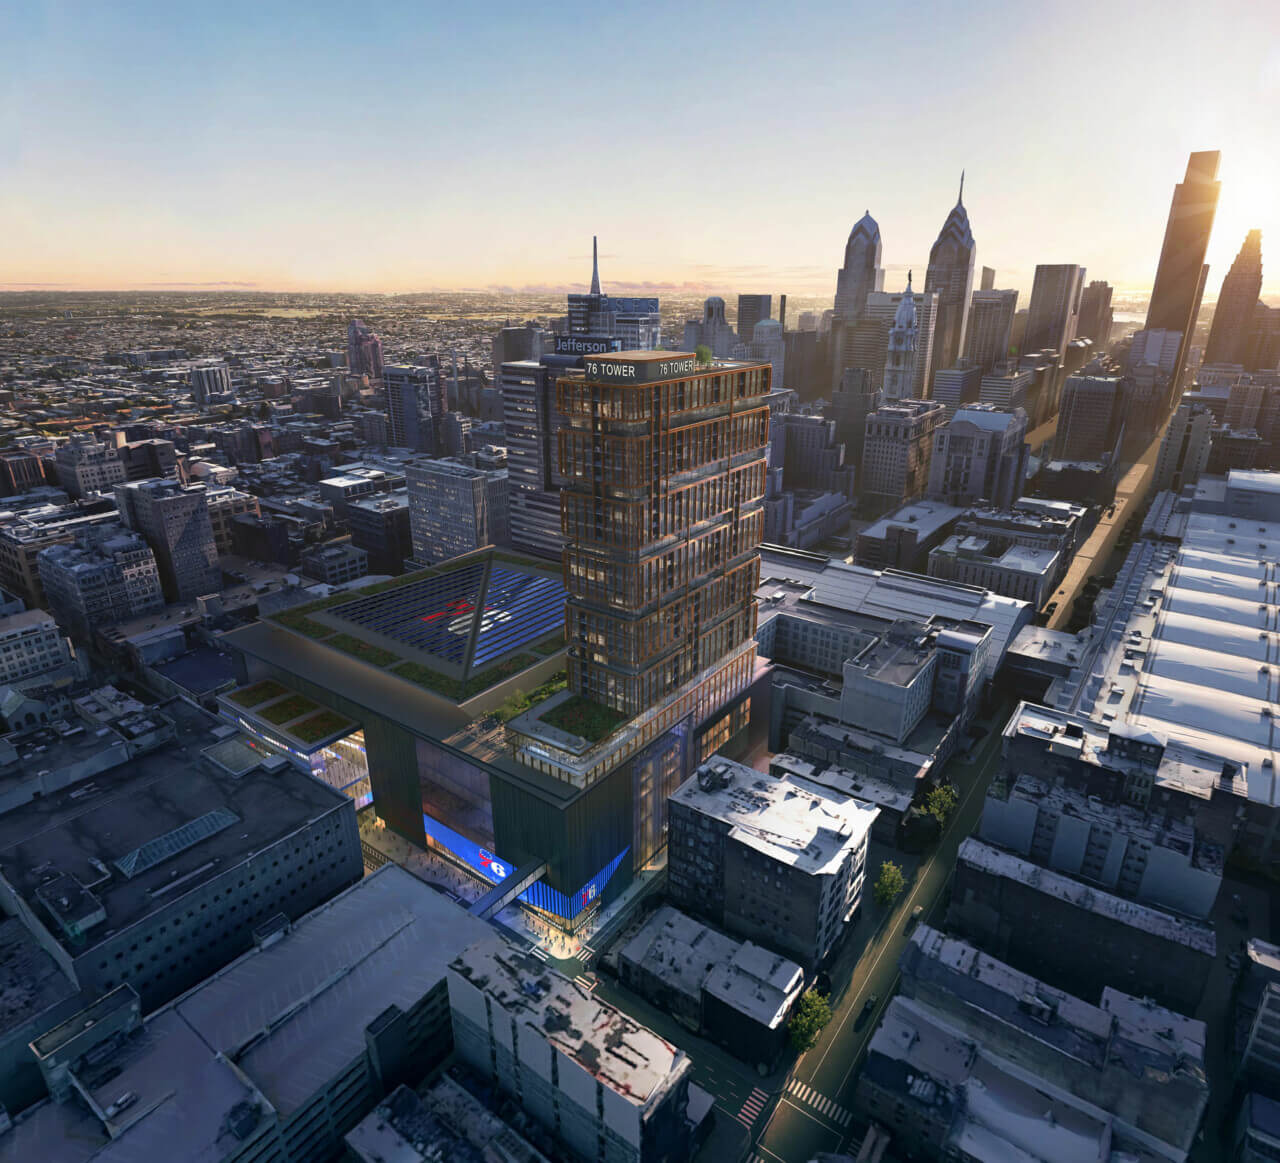 Philadelphia 76ers looking into building new privately funded arena